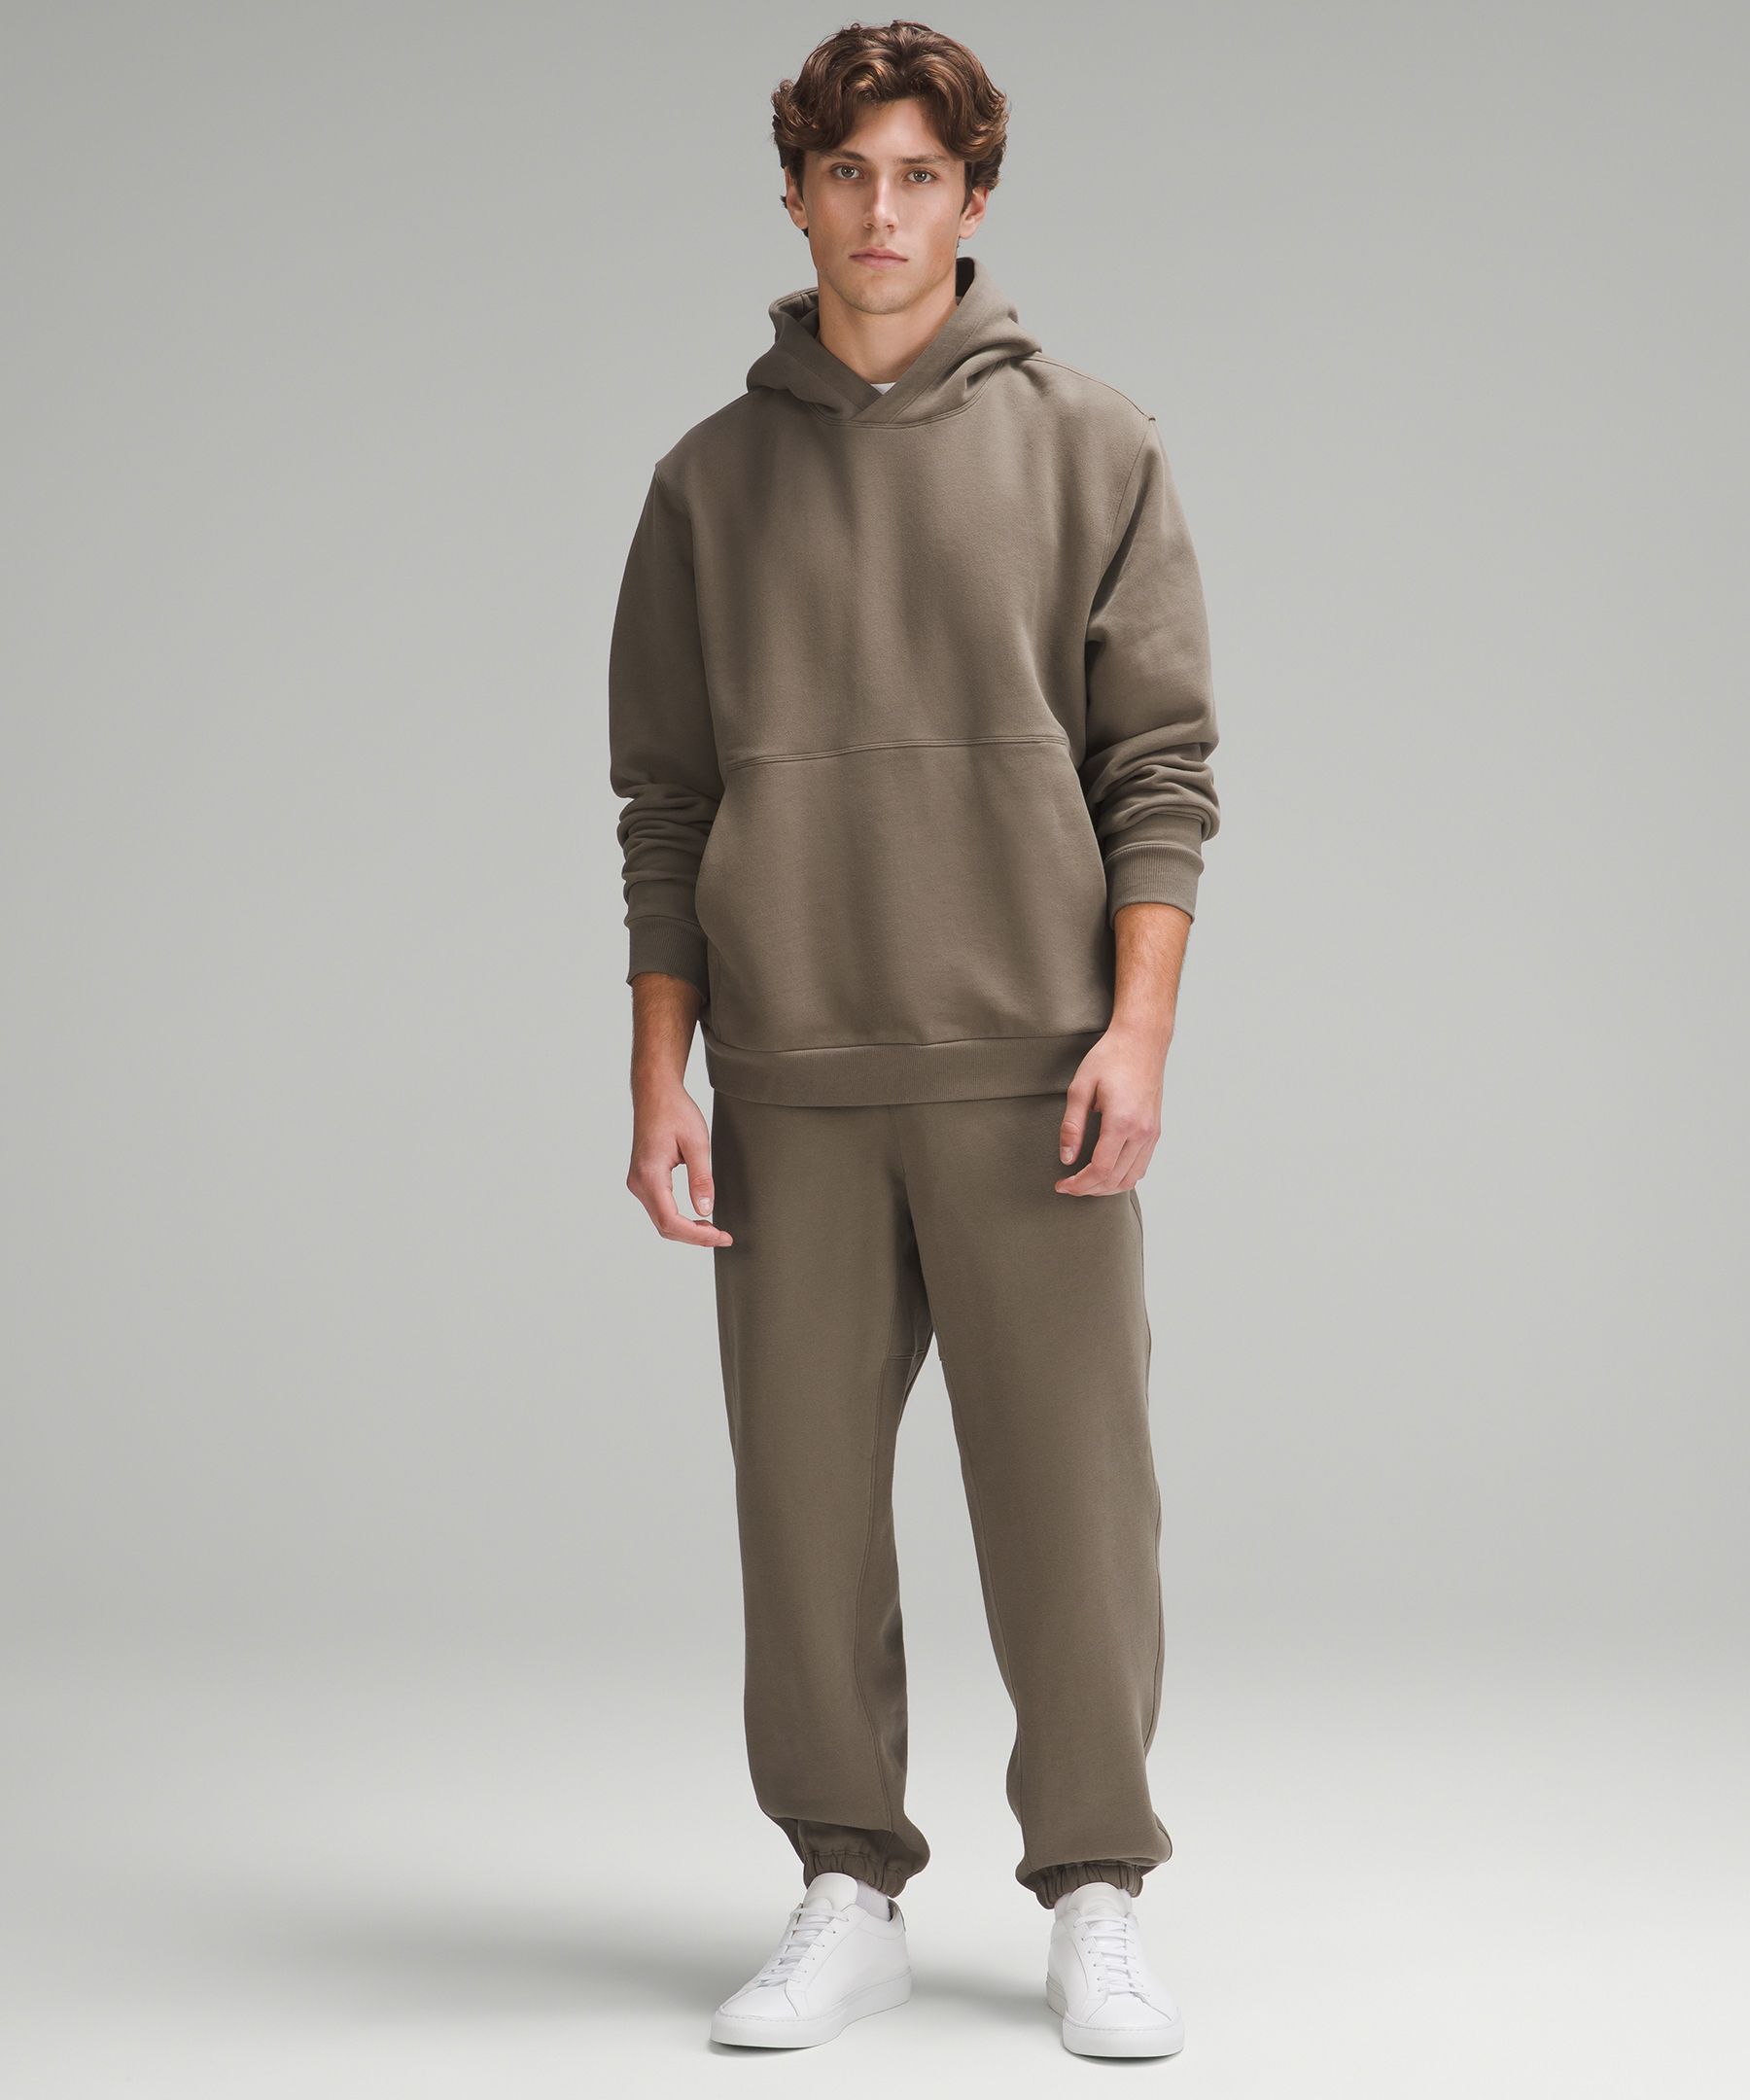 Steady State Jogger, Joggers